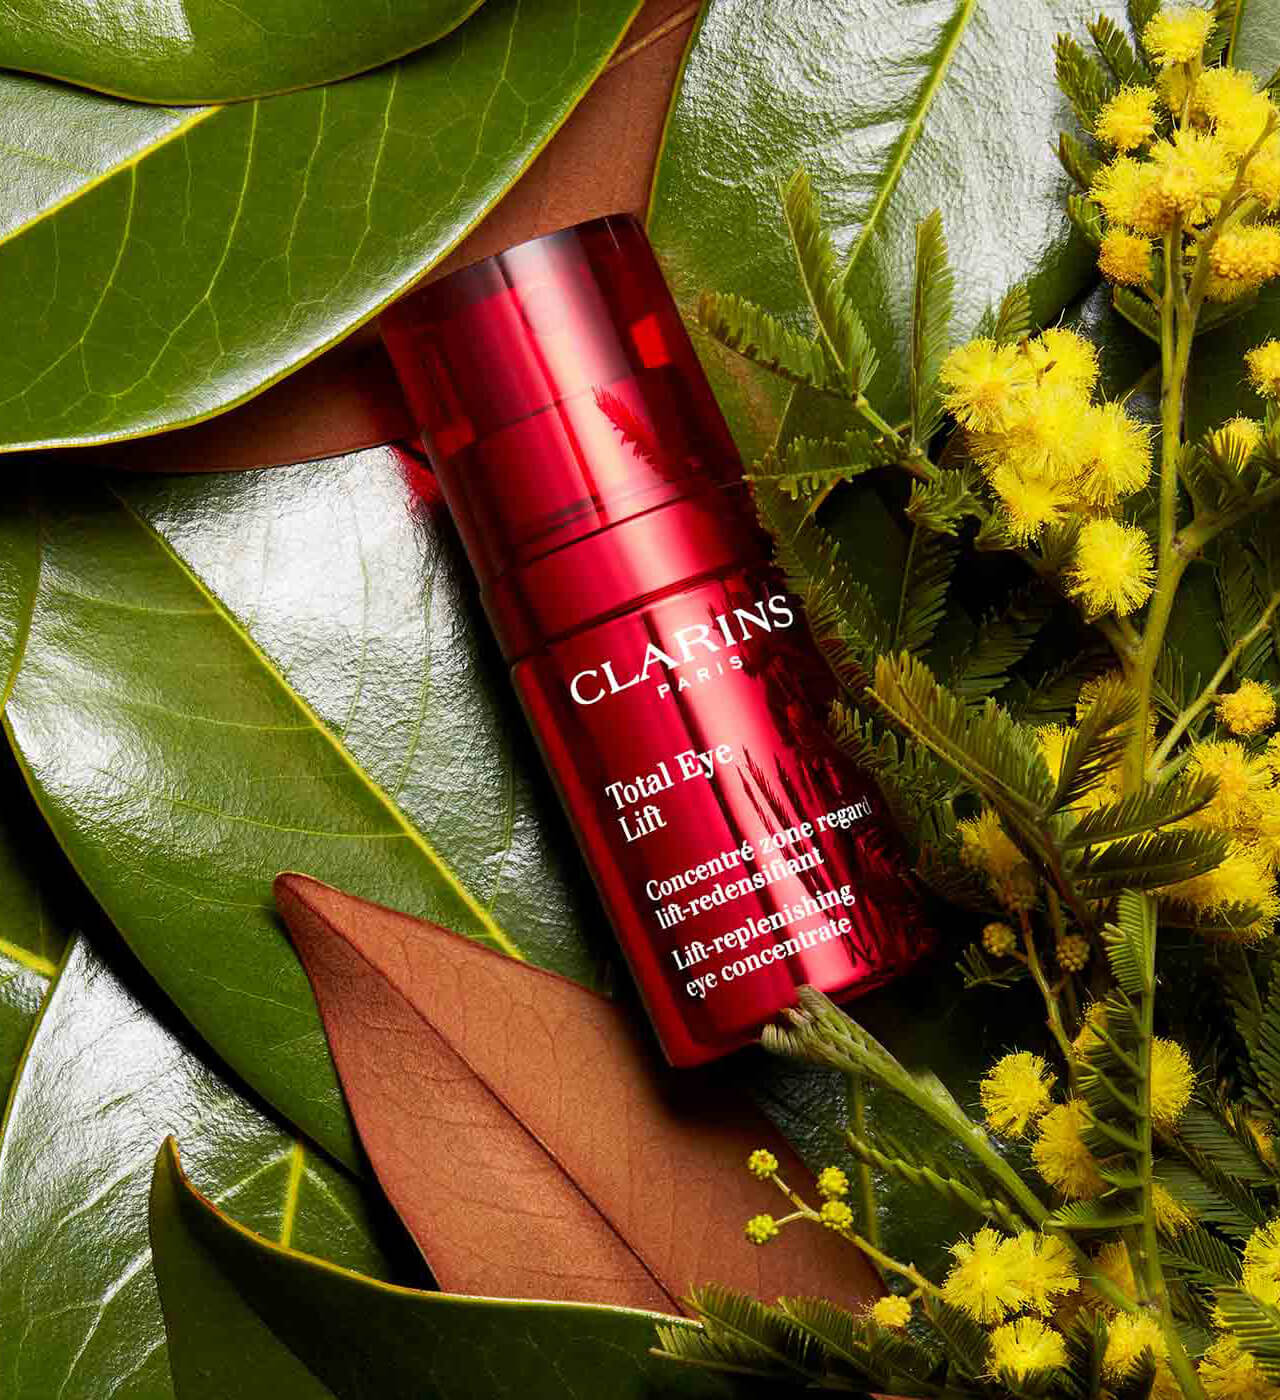 How is the latest Clarins innovation revolutionizing the eye area?